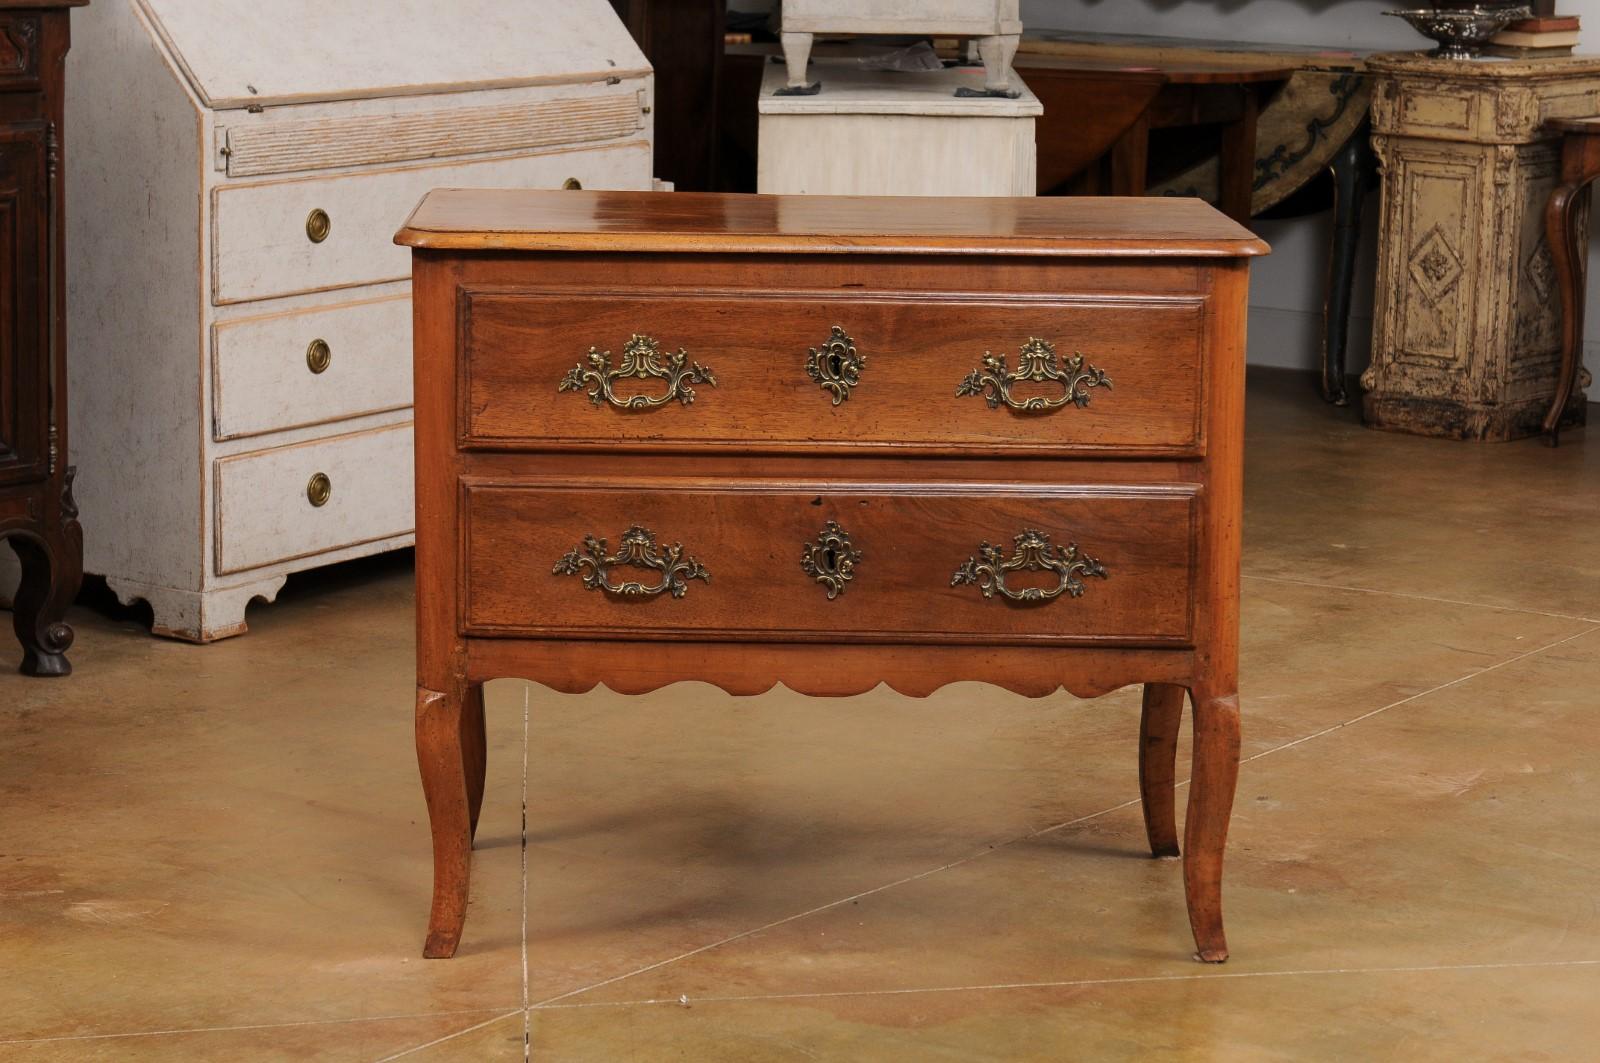 A French Louis XV walnut commode Sauteuse from the late 18th century, with two drawers, bronze Rococo hardware, cabriole legs and small proportions. Created at the end of the reign of France's last absolute monarch Louis XVI's in the last decade of